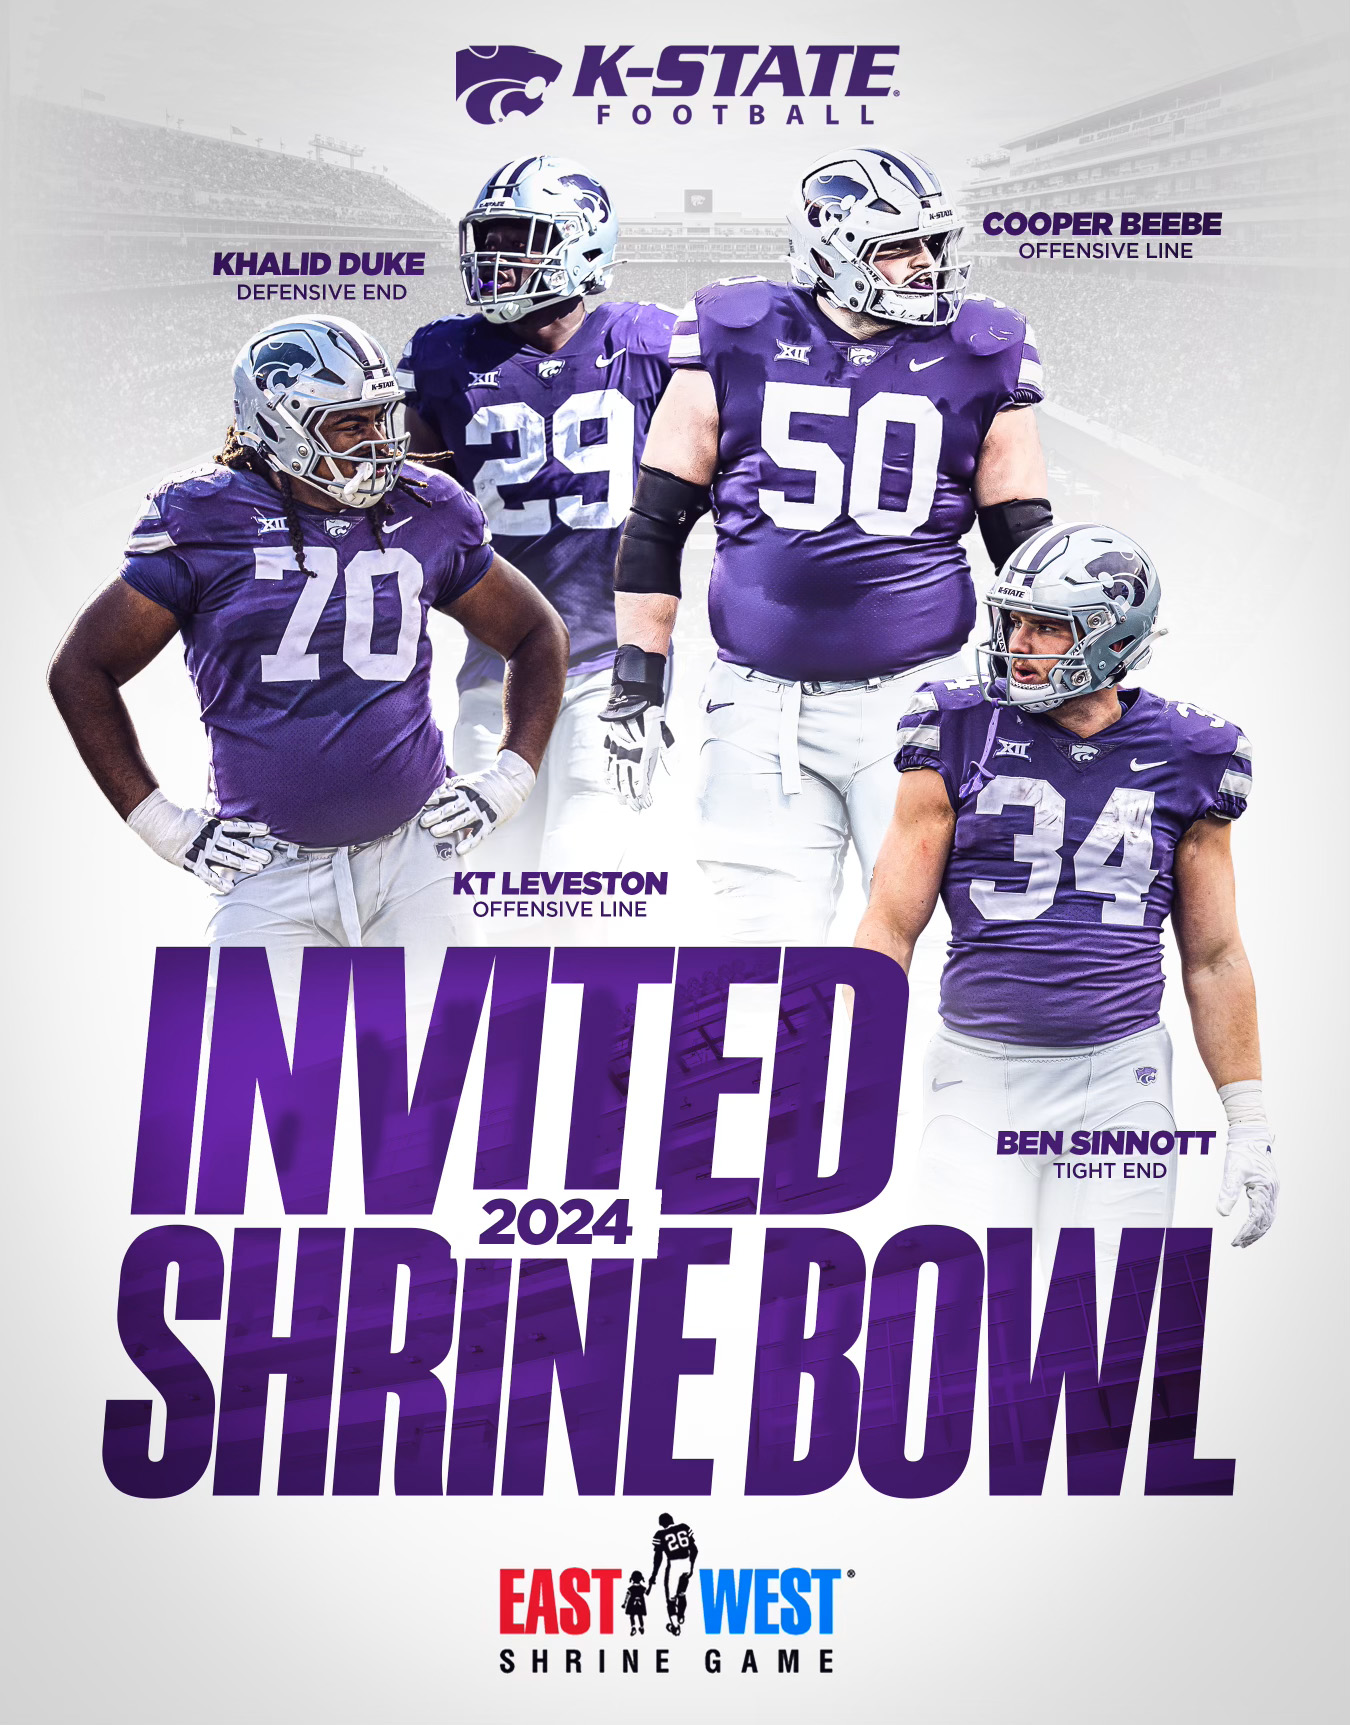 Four Wildcats Earn Invitations to EastWest Shrine Bowl